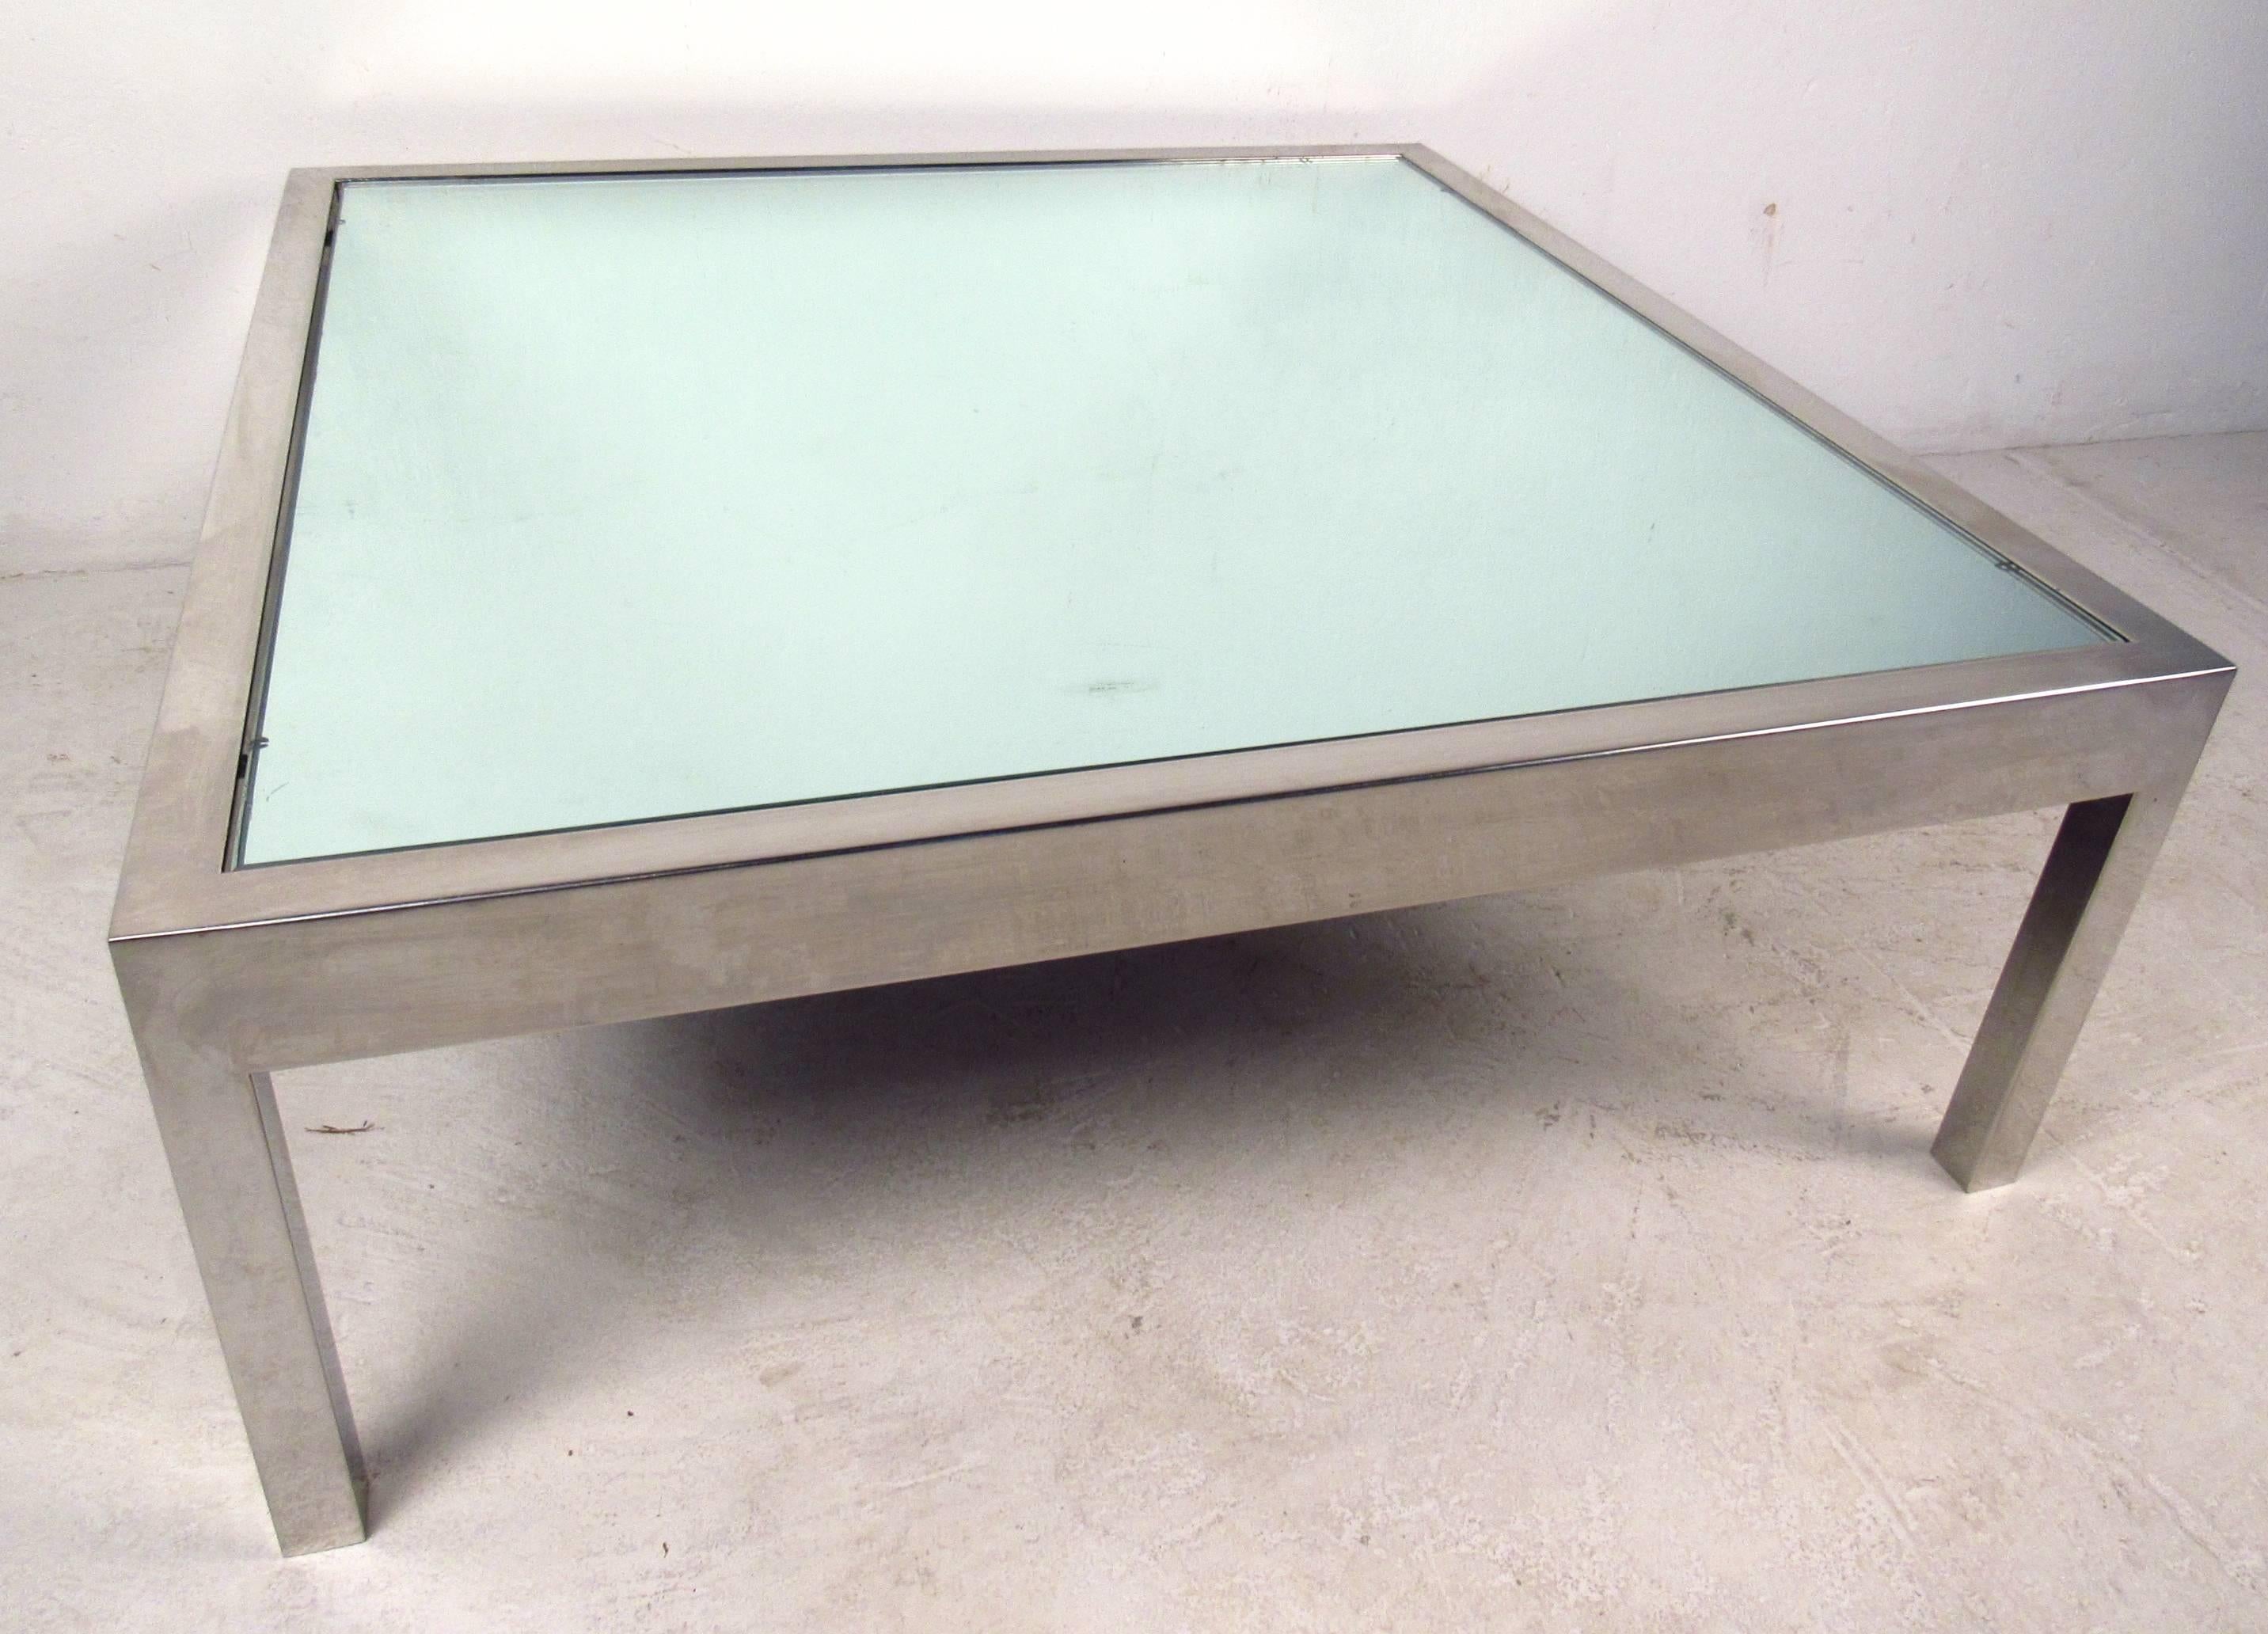 Unique Midcentury Mirrored Glass and Chrome Coffee Table In Good Condition For Sale In Brooklyn, NY